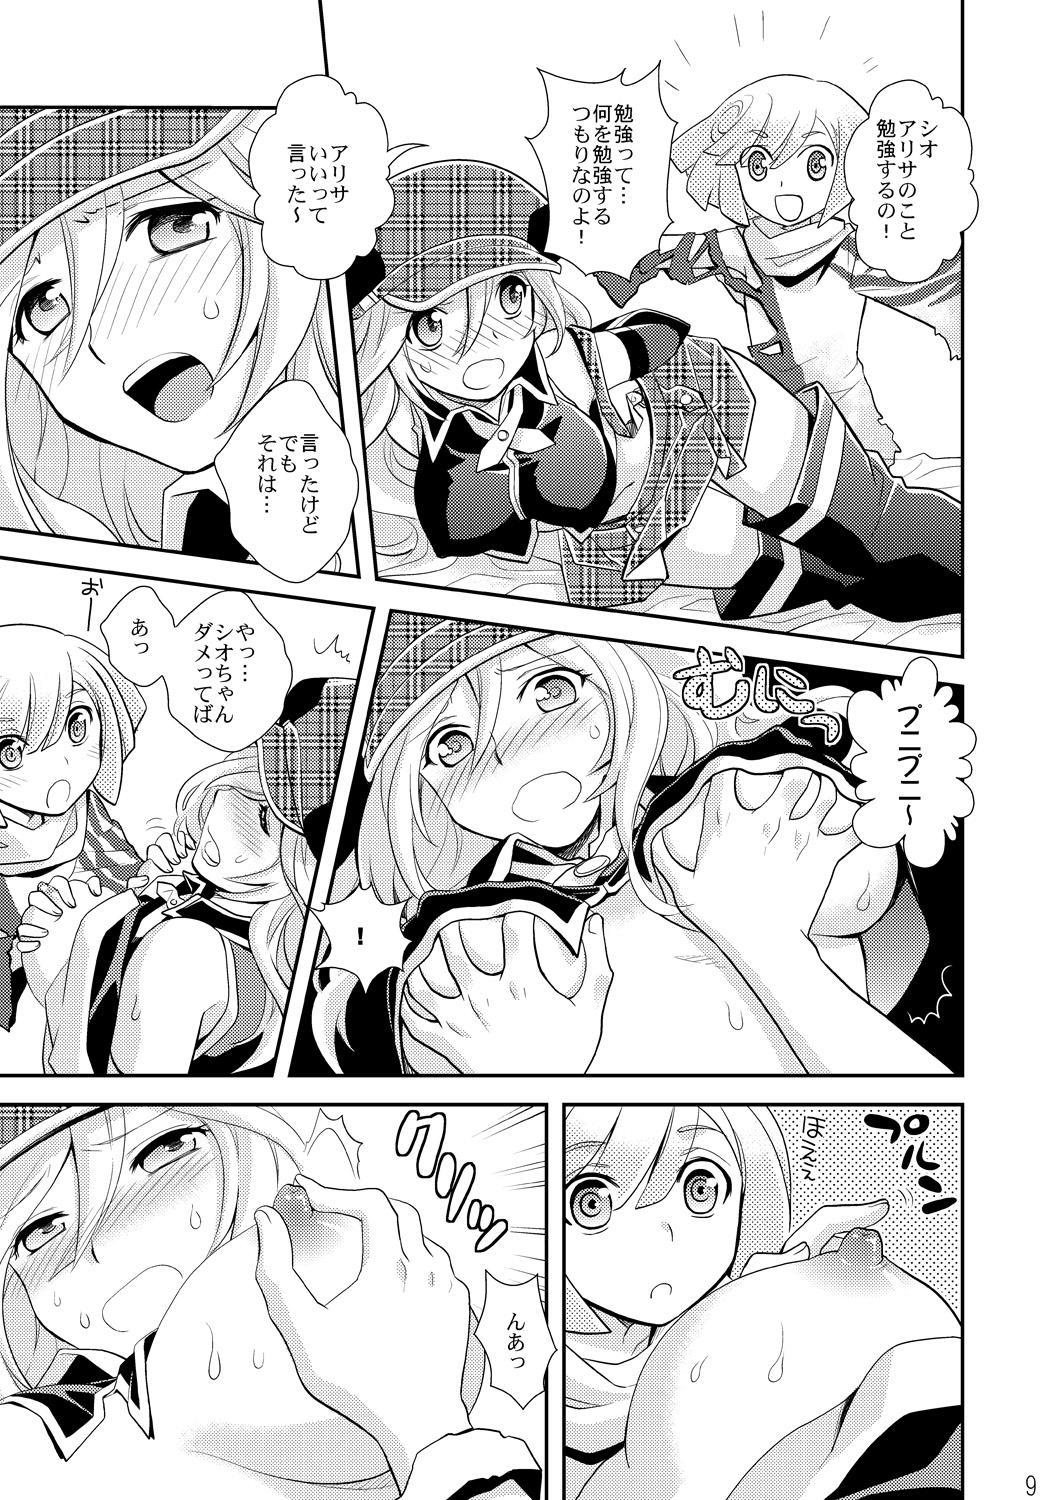 Shavedpussy PUNIPUNI EATER - God eater White Chick - Page 9